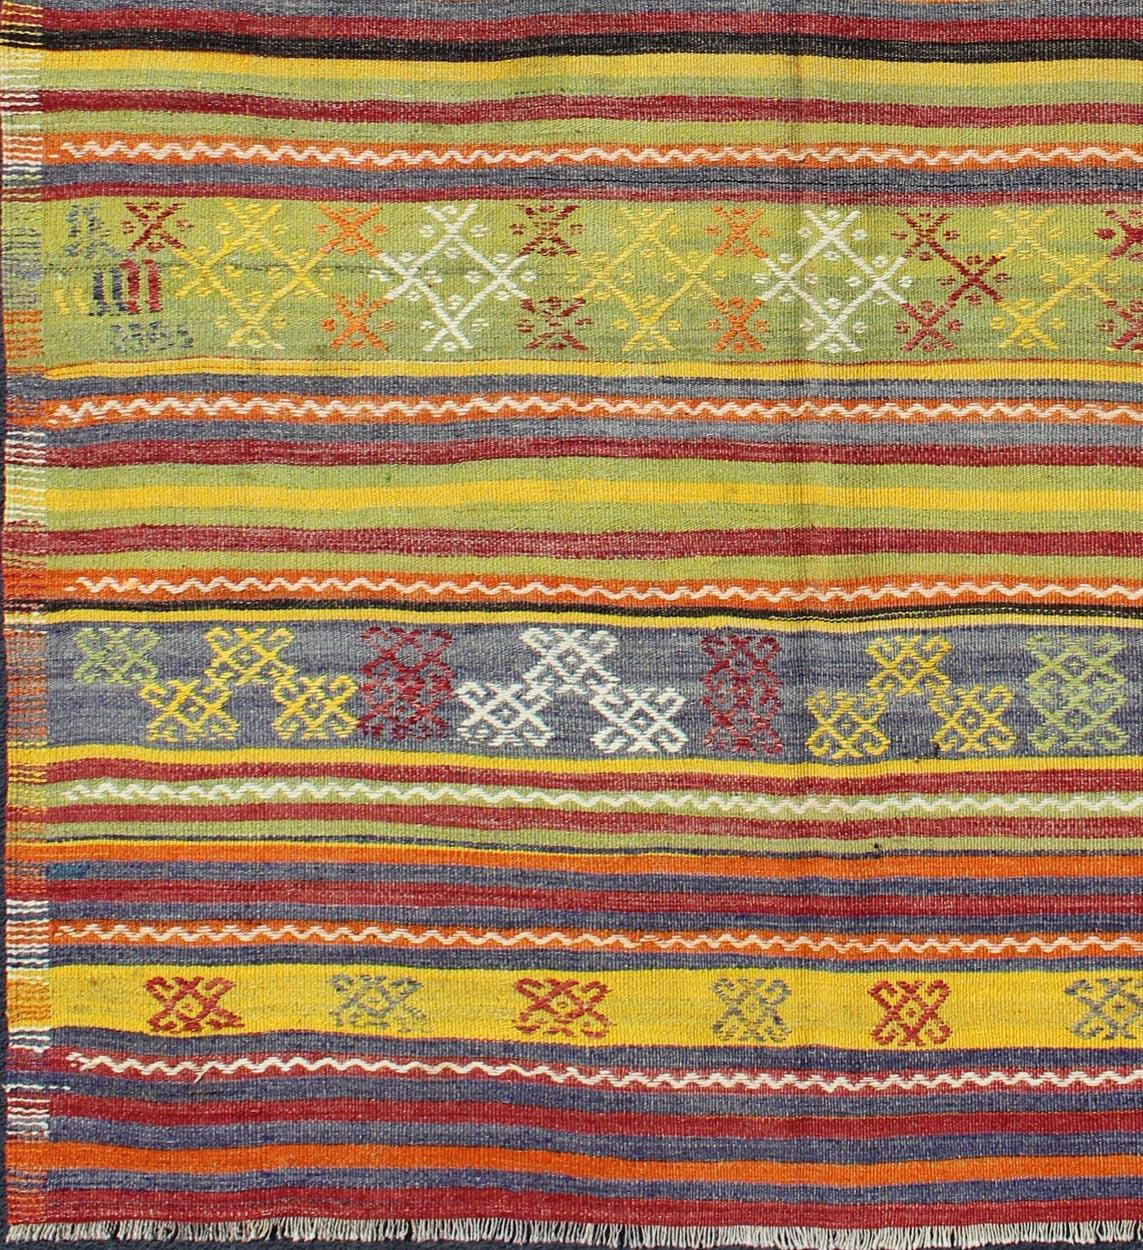 Colorful Vintage Turkish Kilim with bright green, yellow and colorful design, rug TU-NED-107, country of origin / type: Turkey / Kilim, circa mid-20th century

This gorgeous vintage Kilim features geometric shapes rendered in a repeating